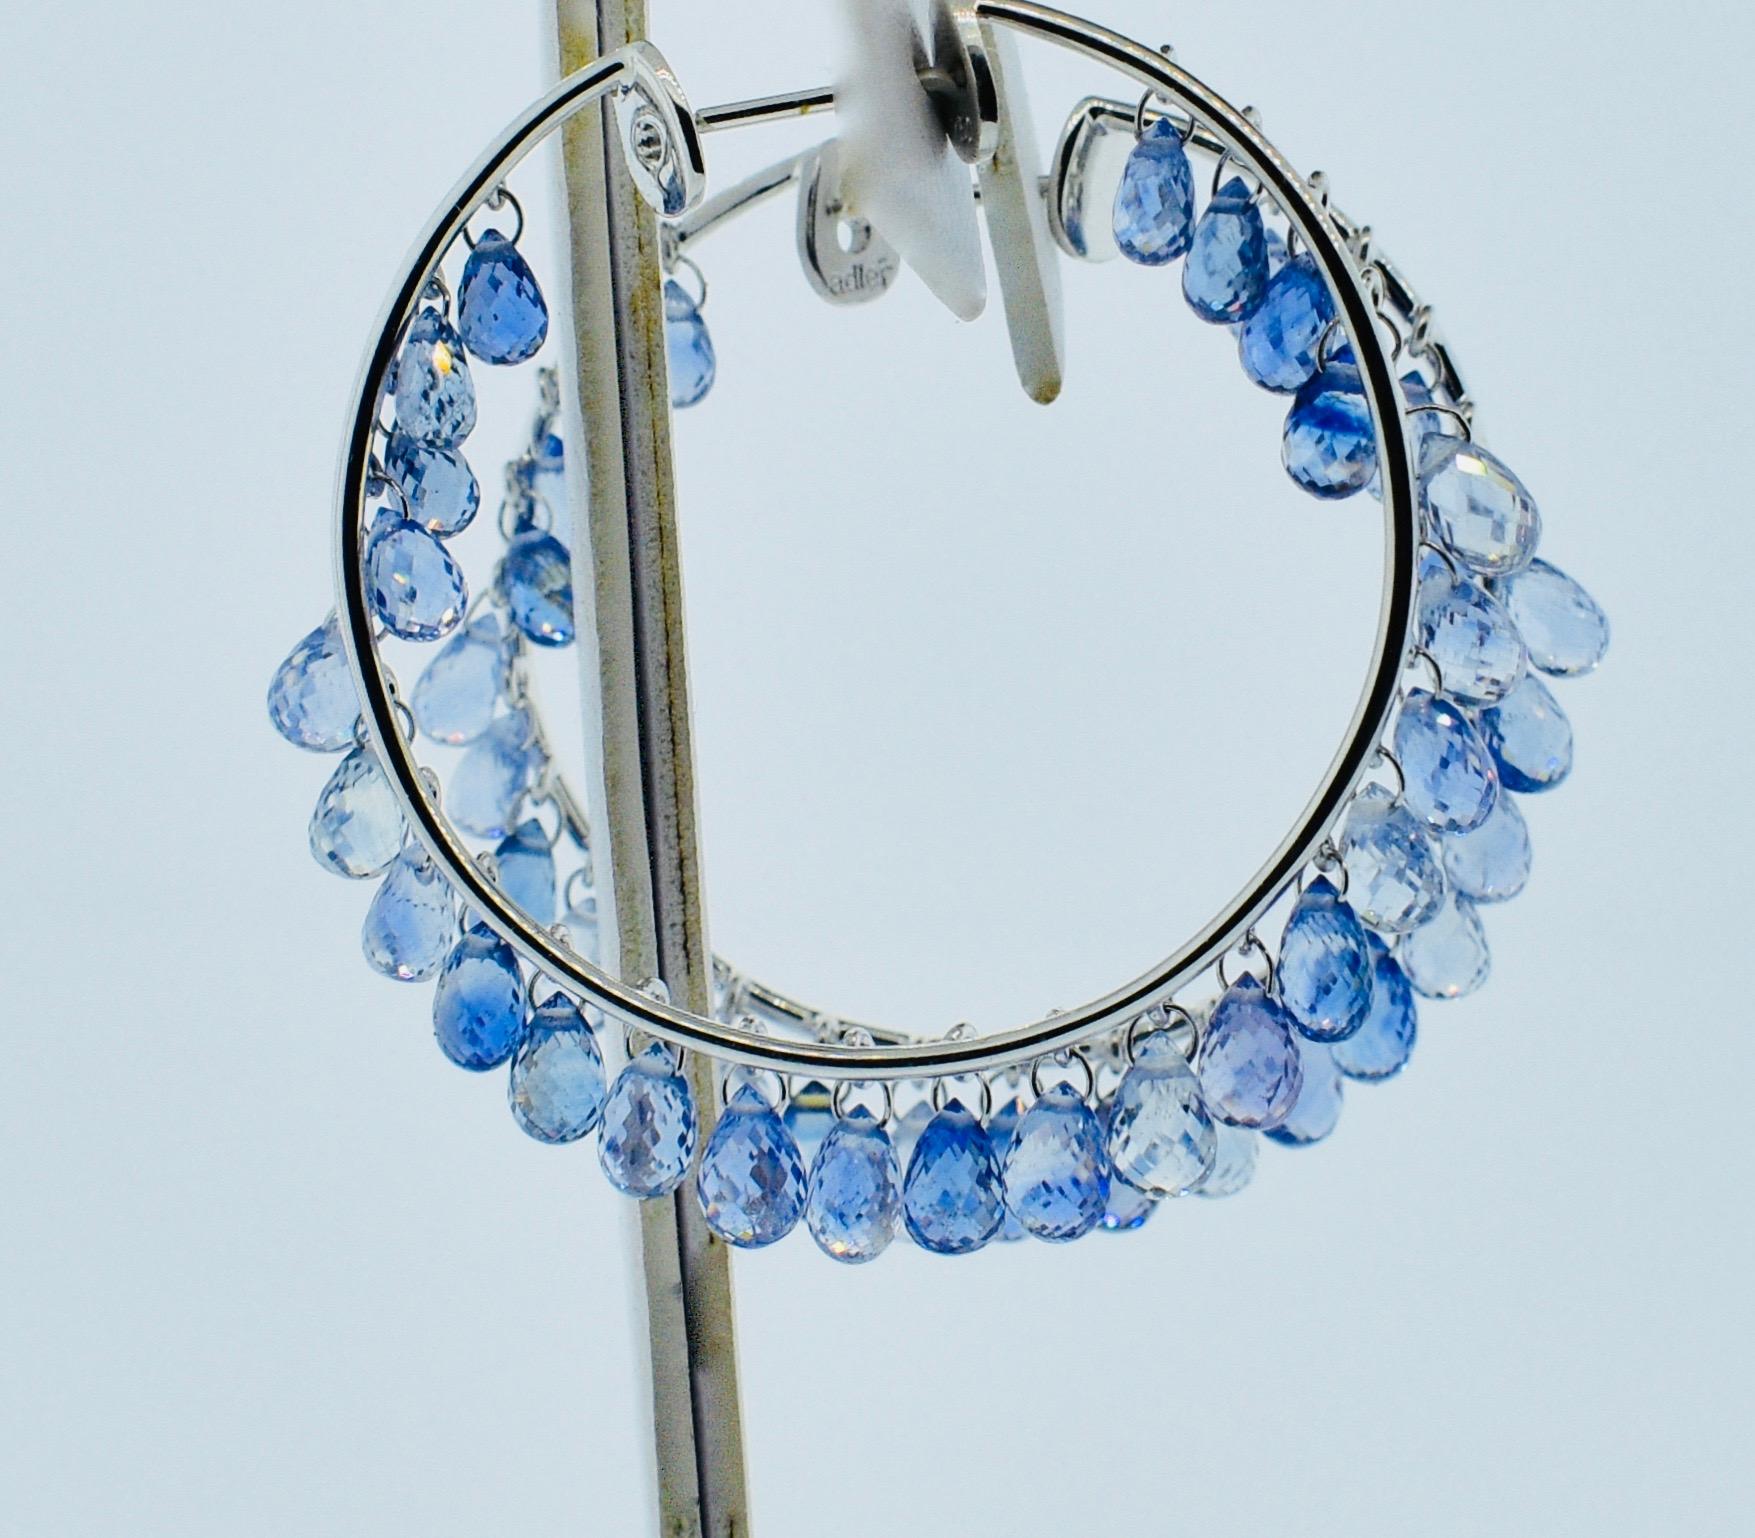 Fine natural light blue sapphire and 18K white gold hoop style earrings by Adler - the fine jewelry house in Geneva. These hand made contemporary medium size hoop earrings are an unusual design with fine stones.  50 briolette cut natural sapphires